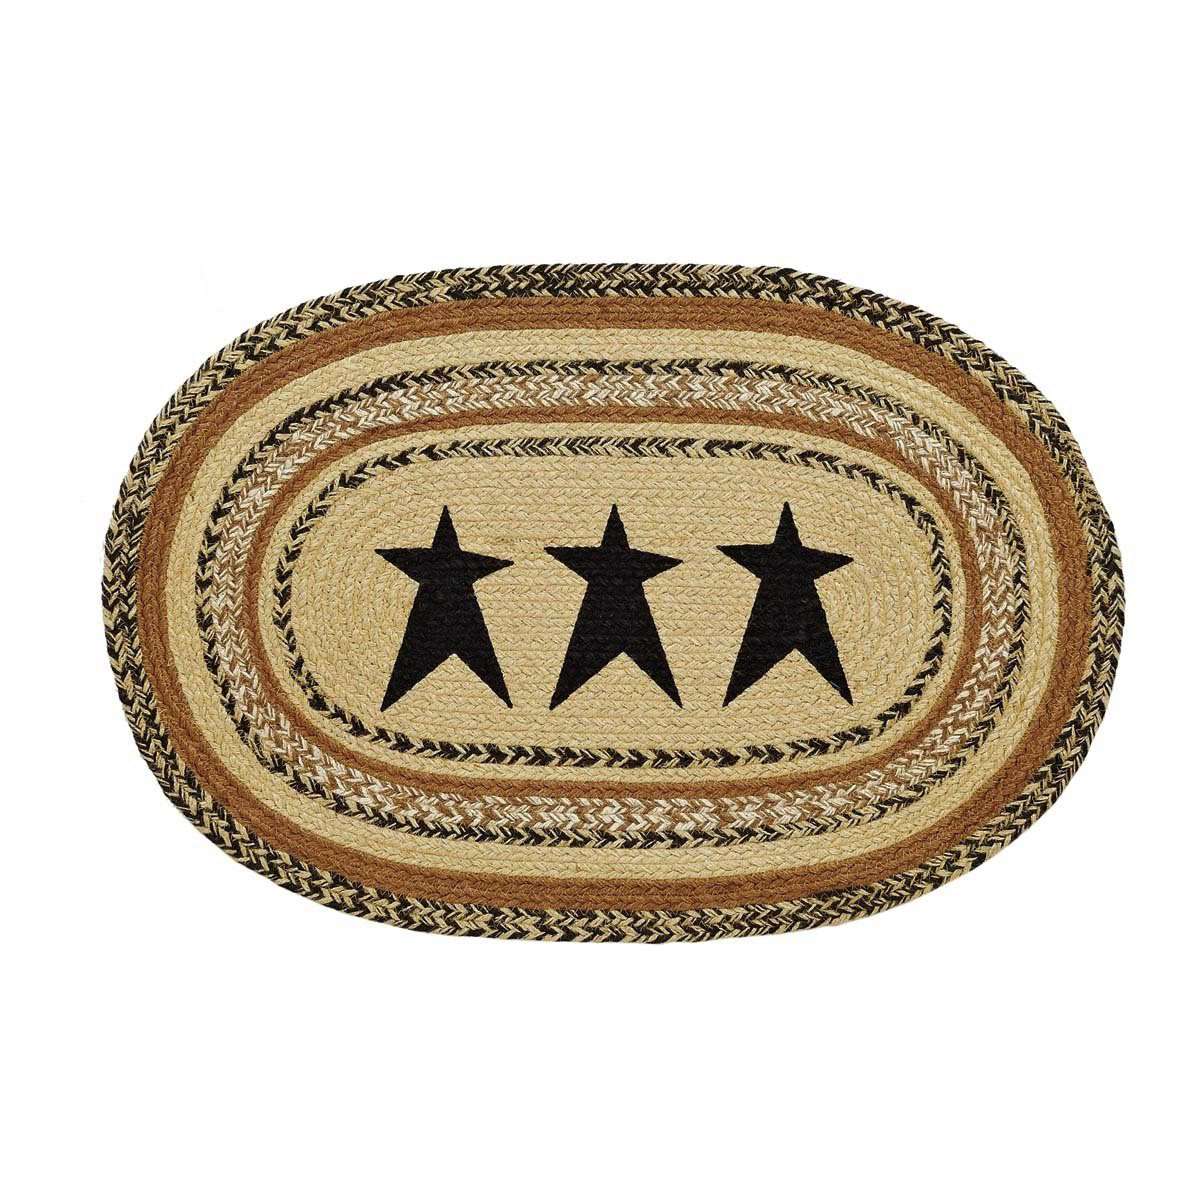 Kettle Grove Jute Braided Rugs Oval Stencil Star VHC Brands Rugs VHC Brands 20"X30" 